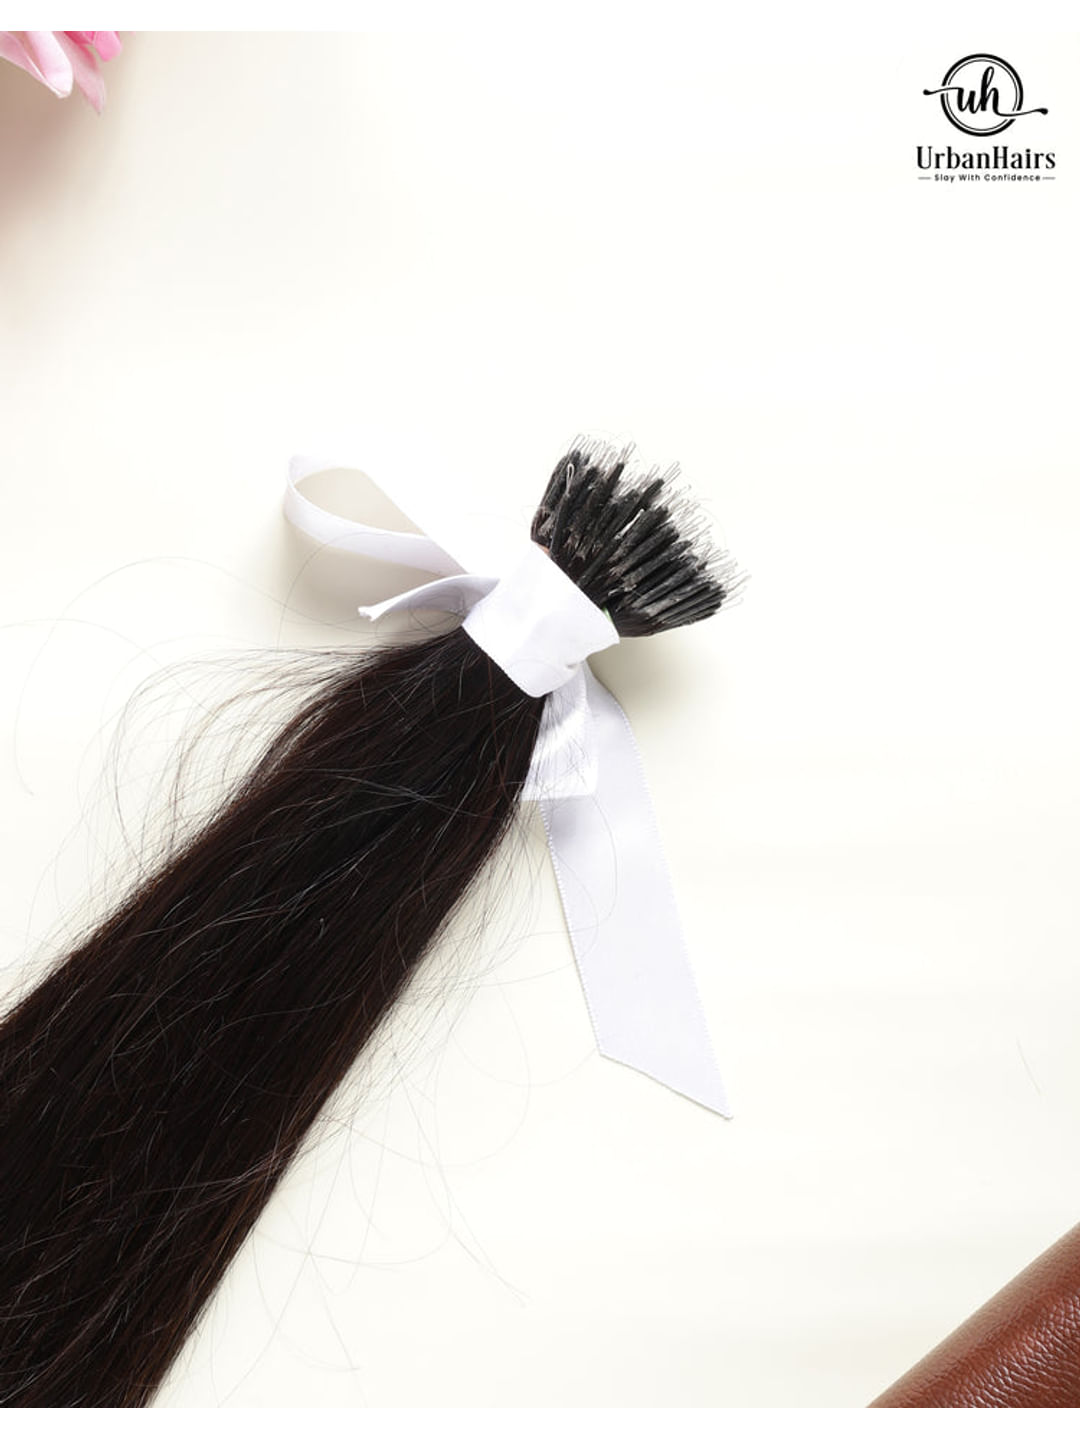 NANO TIP  (100% ORIGINAL PERMANENT HAIR EXTENSIONS) (Color, Length, Strands option available)